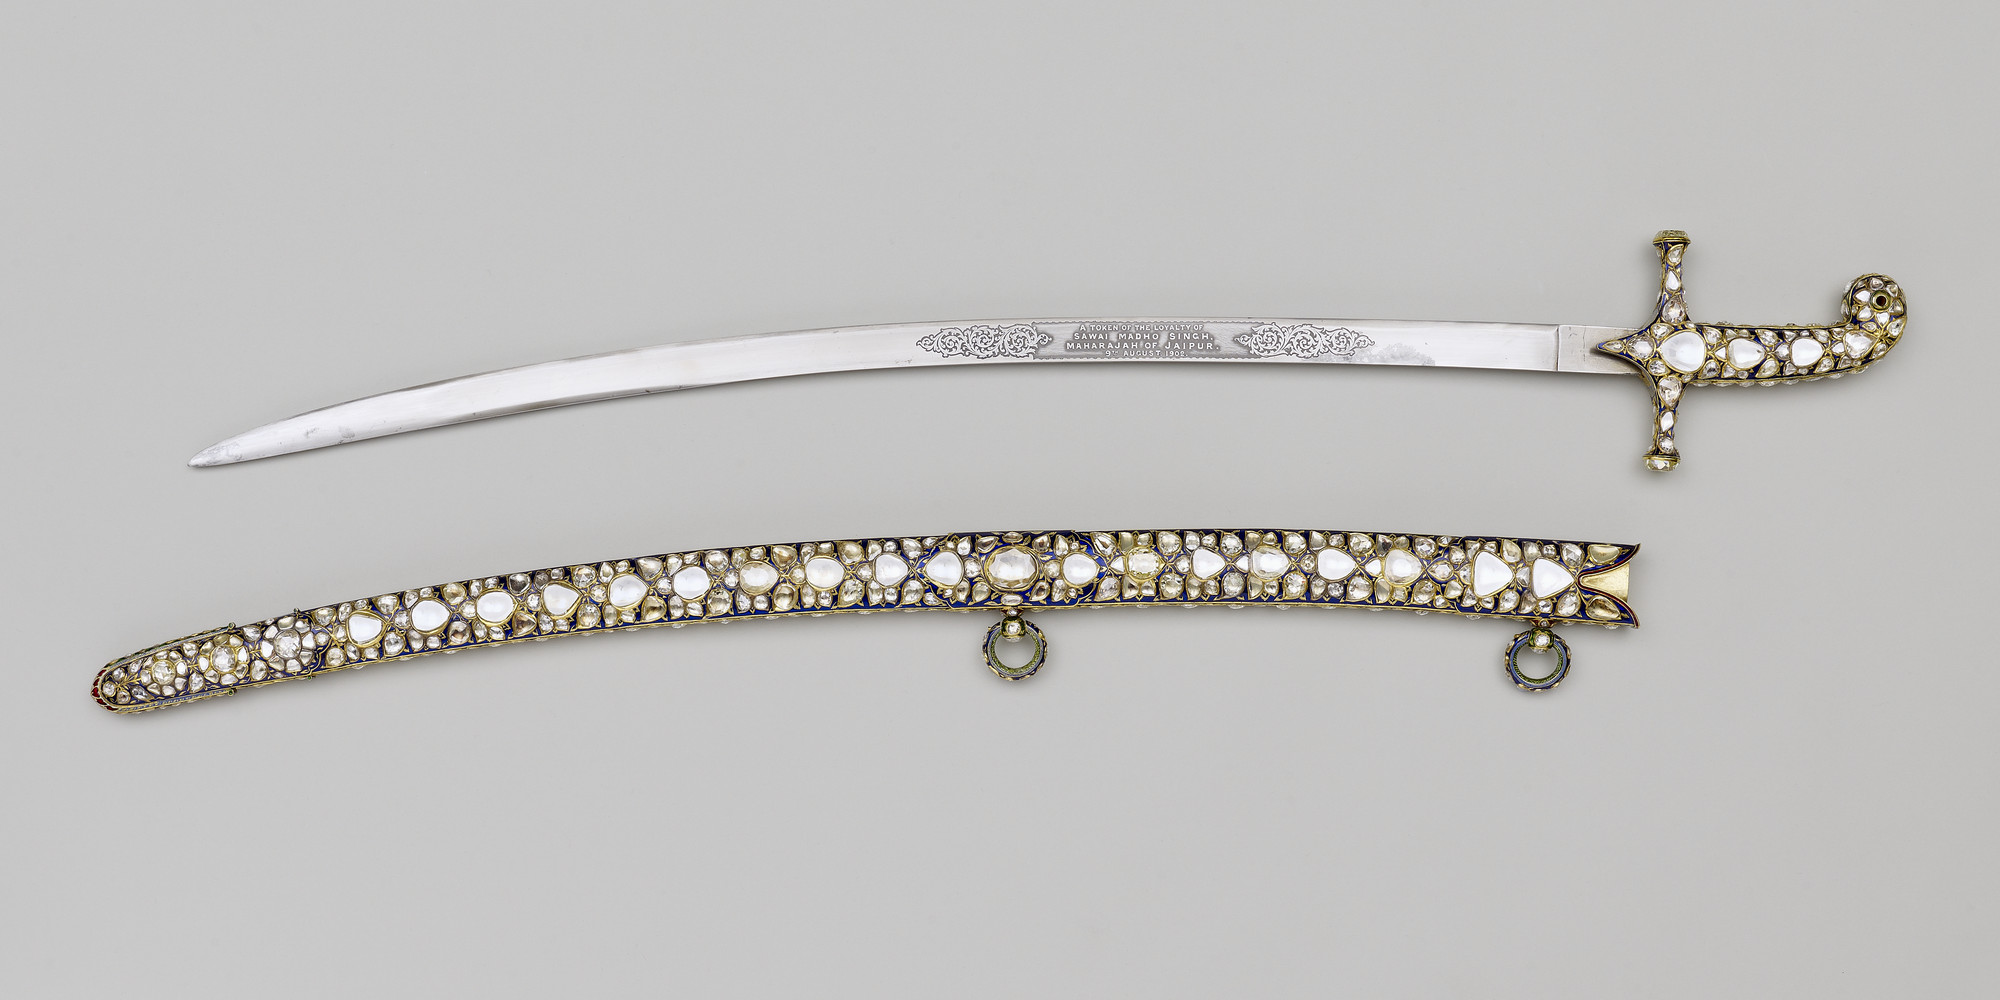 This exceptionally rich sword and scabbard were presented to Edward VII on the occasion of his coronation by Sawai Sir Madho Singh Bahadur (1861-1922), Maharaja of Jaipur, one of the small group of Indian princes and nobles invited to attend the ceremony 